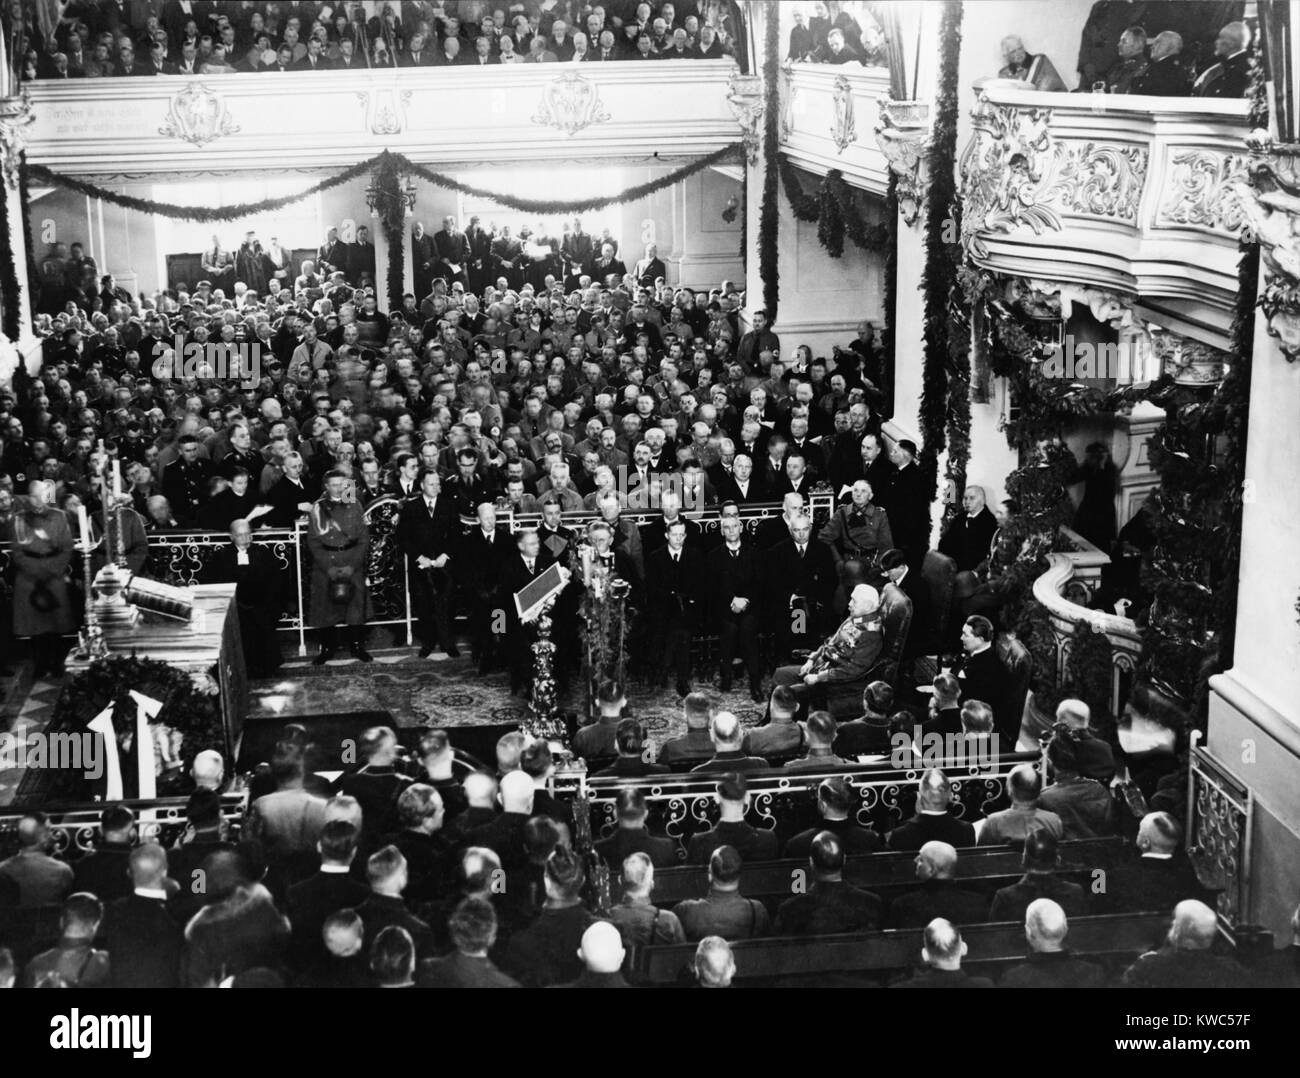 Paul von Hindenburg, Adolf Hitler, and Hermann Goering (lower right), March 21, 1933. They were in the Garrison Church in Potsdam for ceremonies opening the Reichstag session. Hitler was named Chancellor of Germany on Jan. 30, 1933. (BSLOC_2015_14_11) Stock Photo